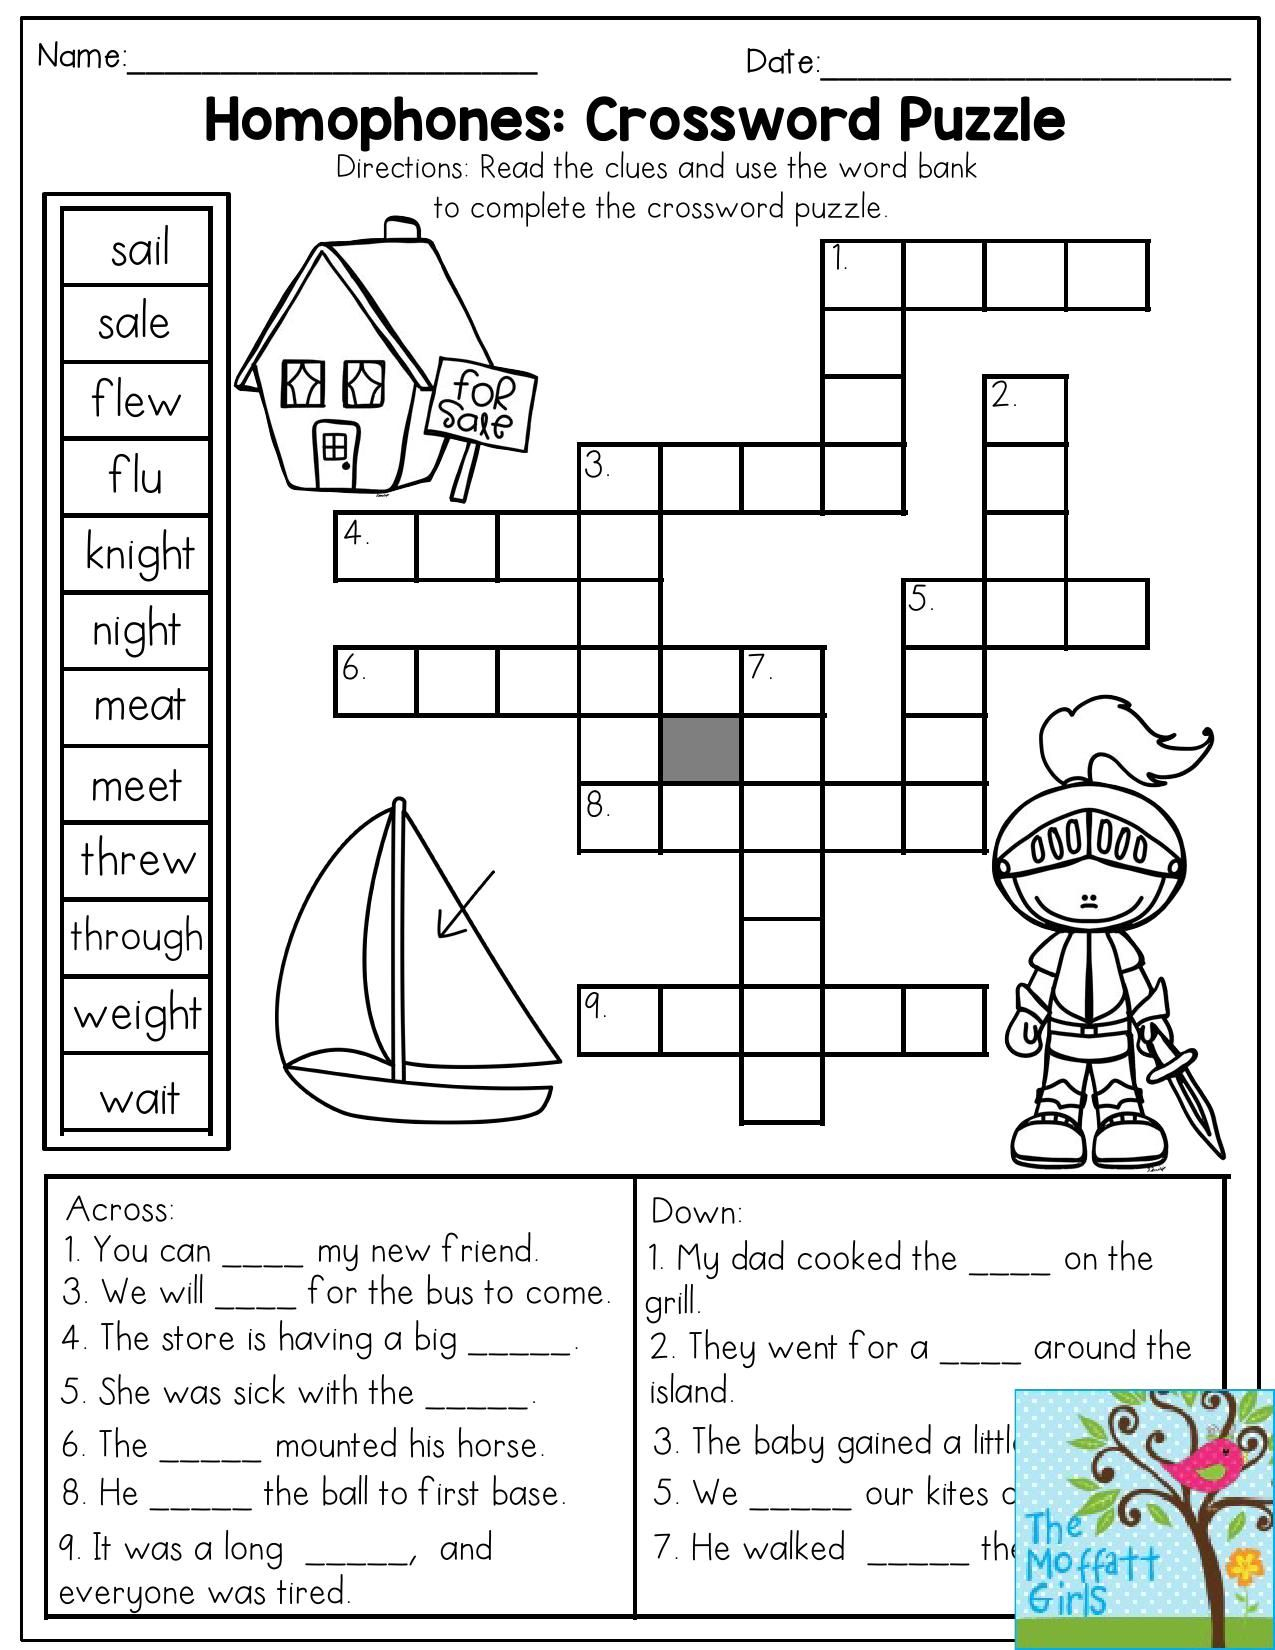 Homophones: Crossword Puzzle- Read The Clues And Use The Word Bank - Grade 1 Crossword Puzzles Printable